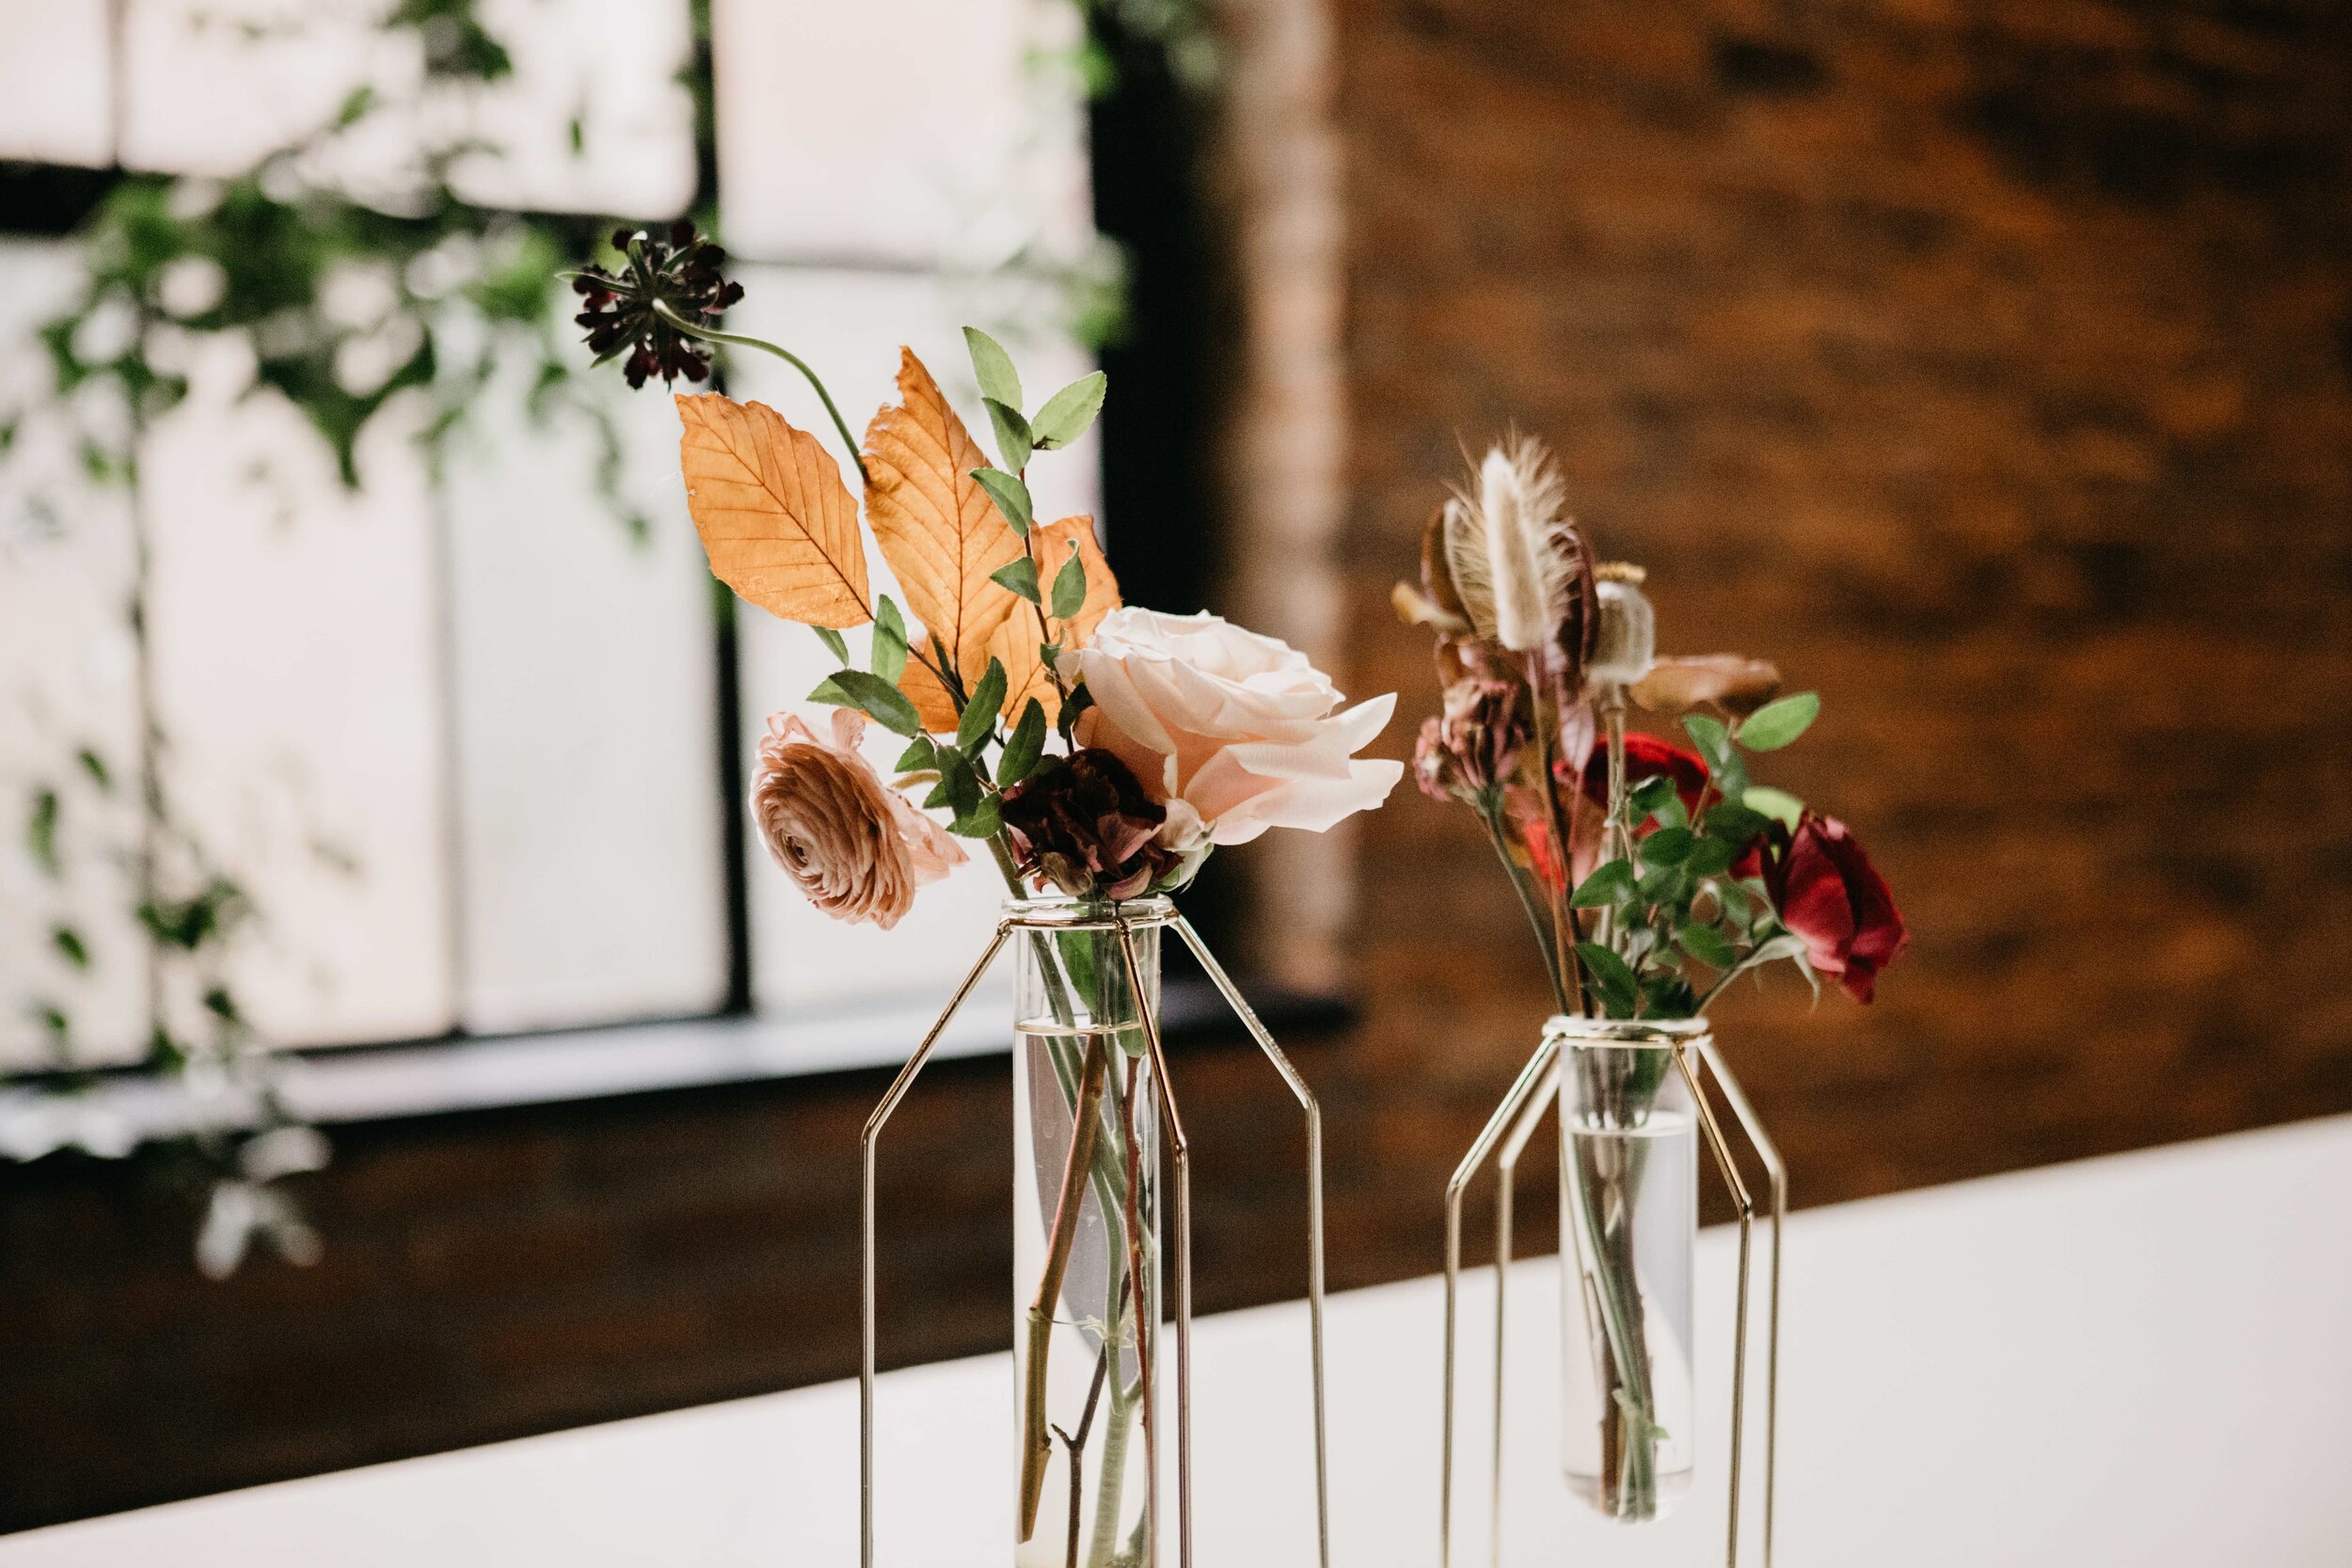 Modern, geometric bud vase with fall florals and dried elements. Nashville wedding florist, Rosemary & Finch, at Clementine.